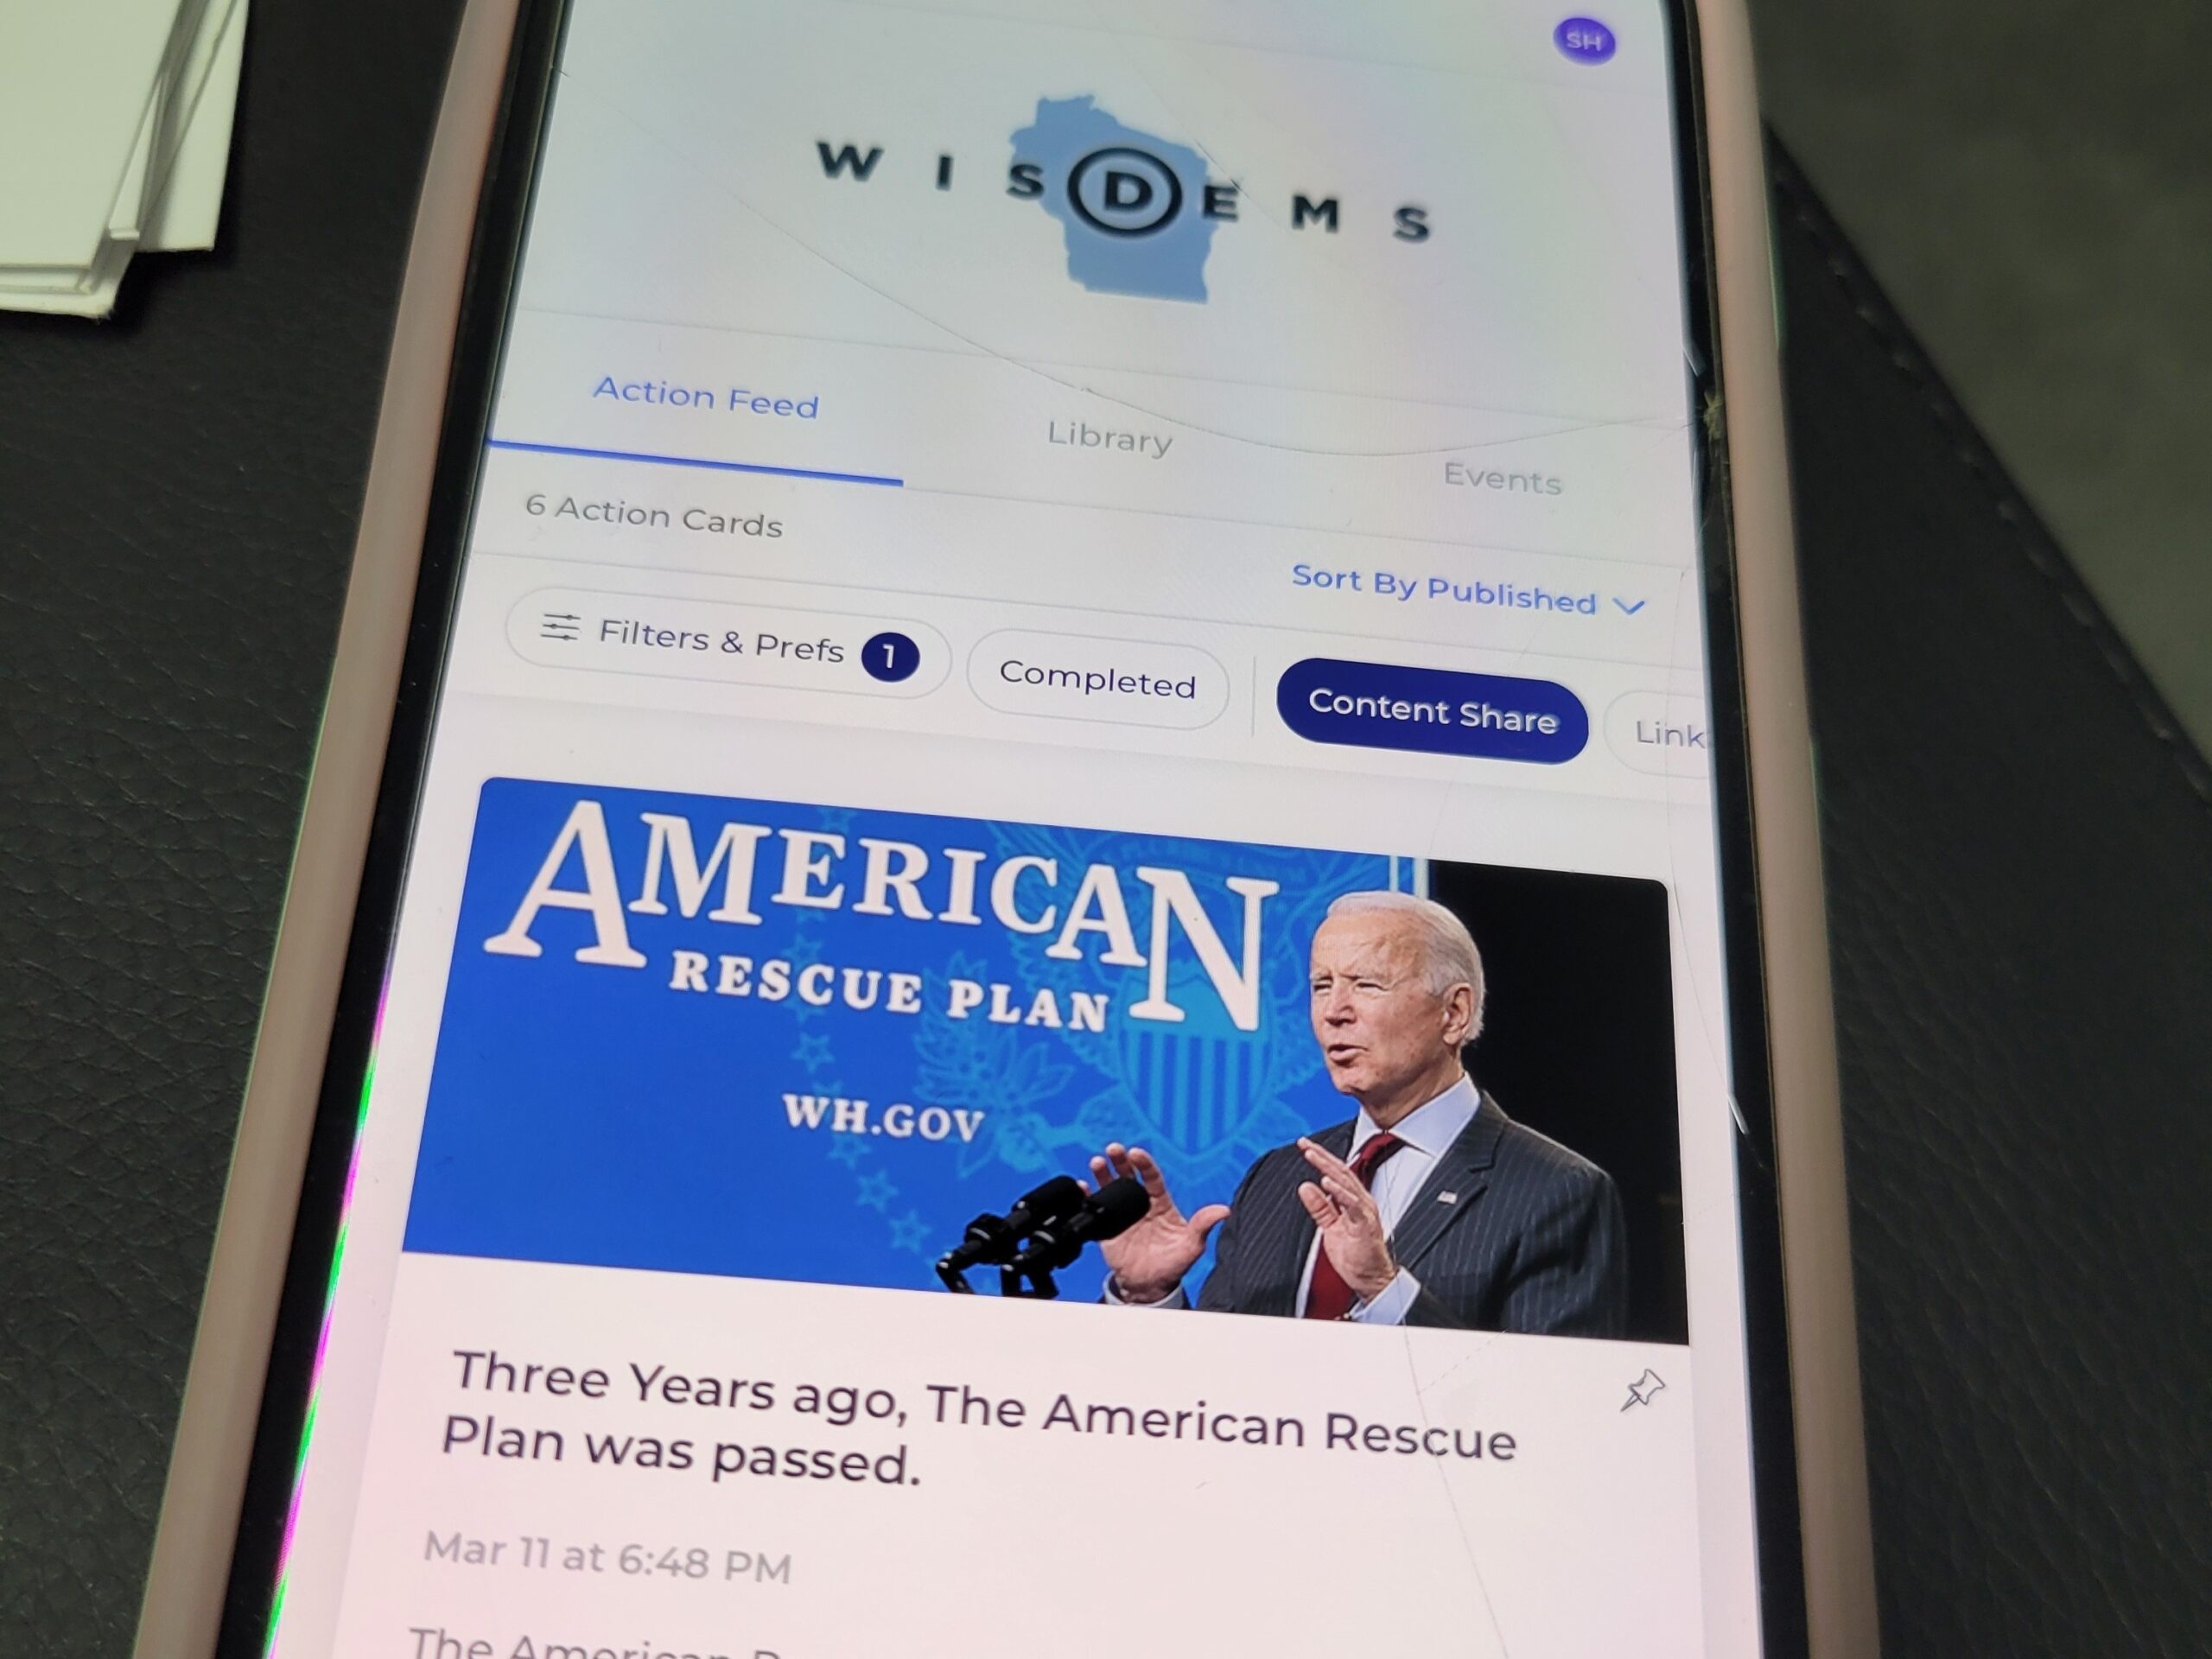 It’s easy to tune out politics. Biden’s campaign is using an app to get around that